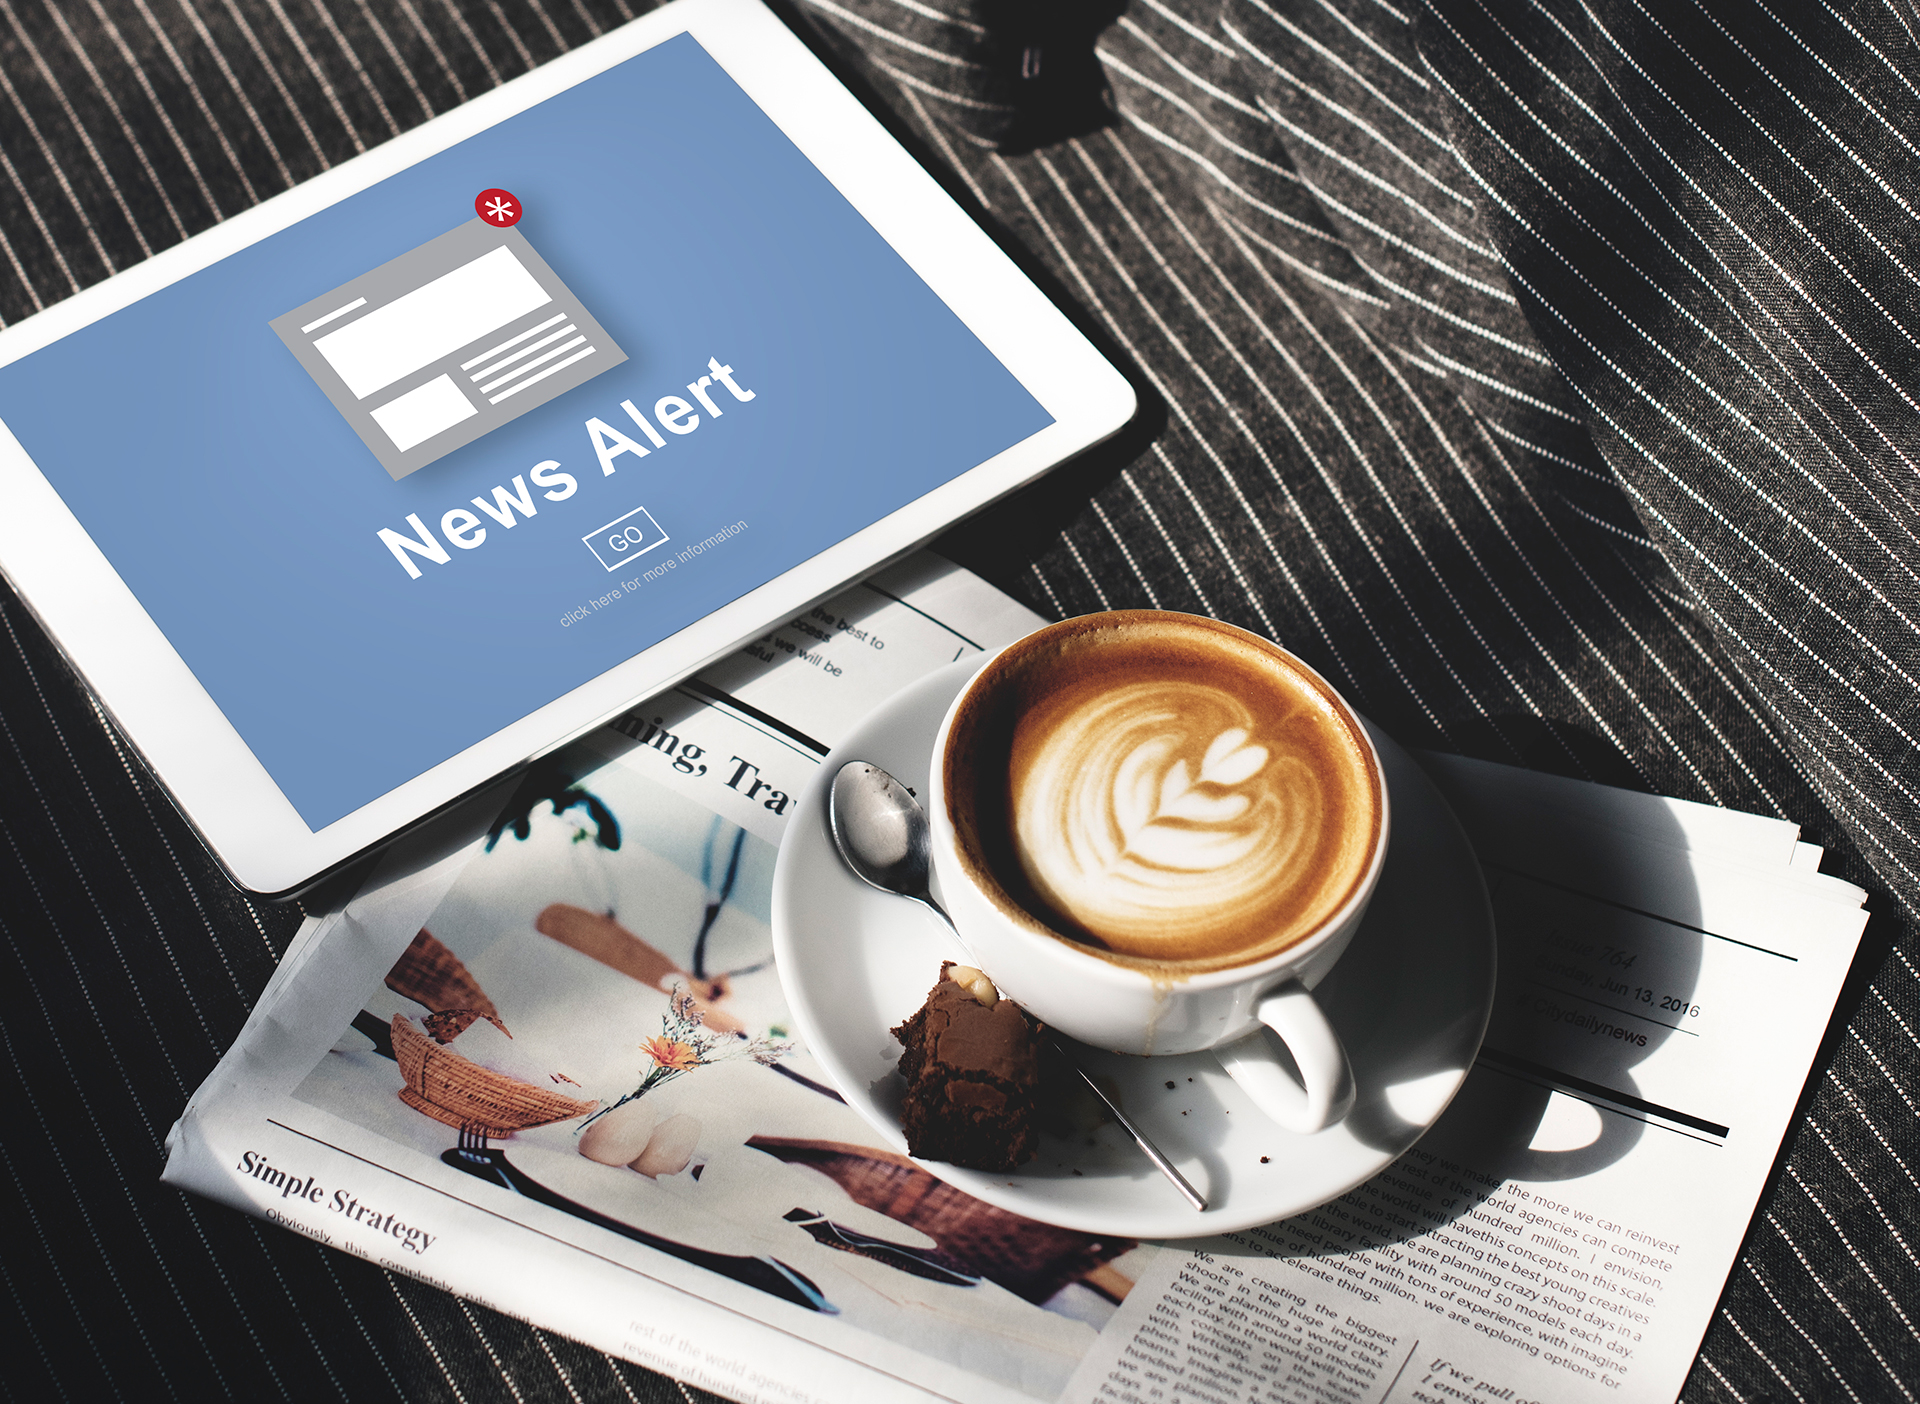 image of a news alert on a tablet screen with a latte and newspaper nearby